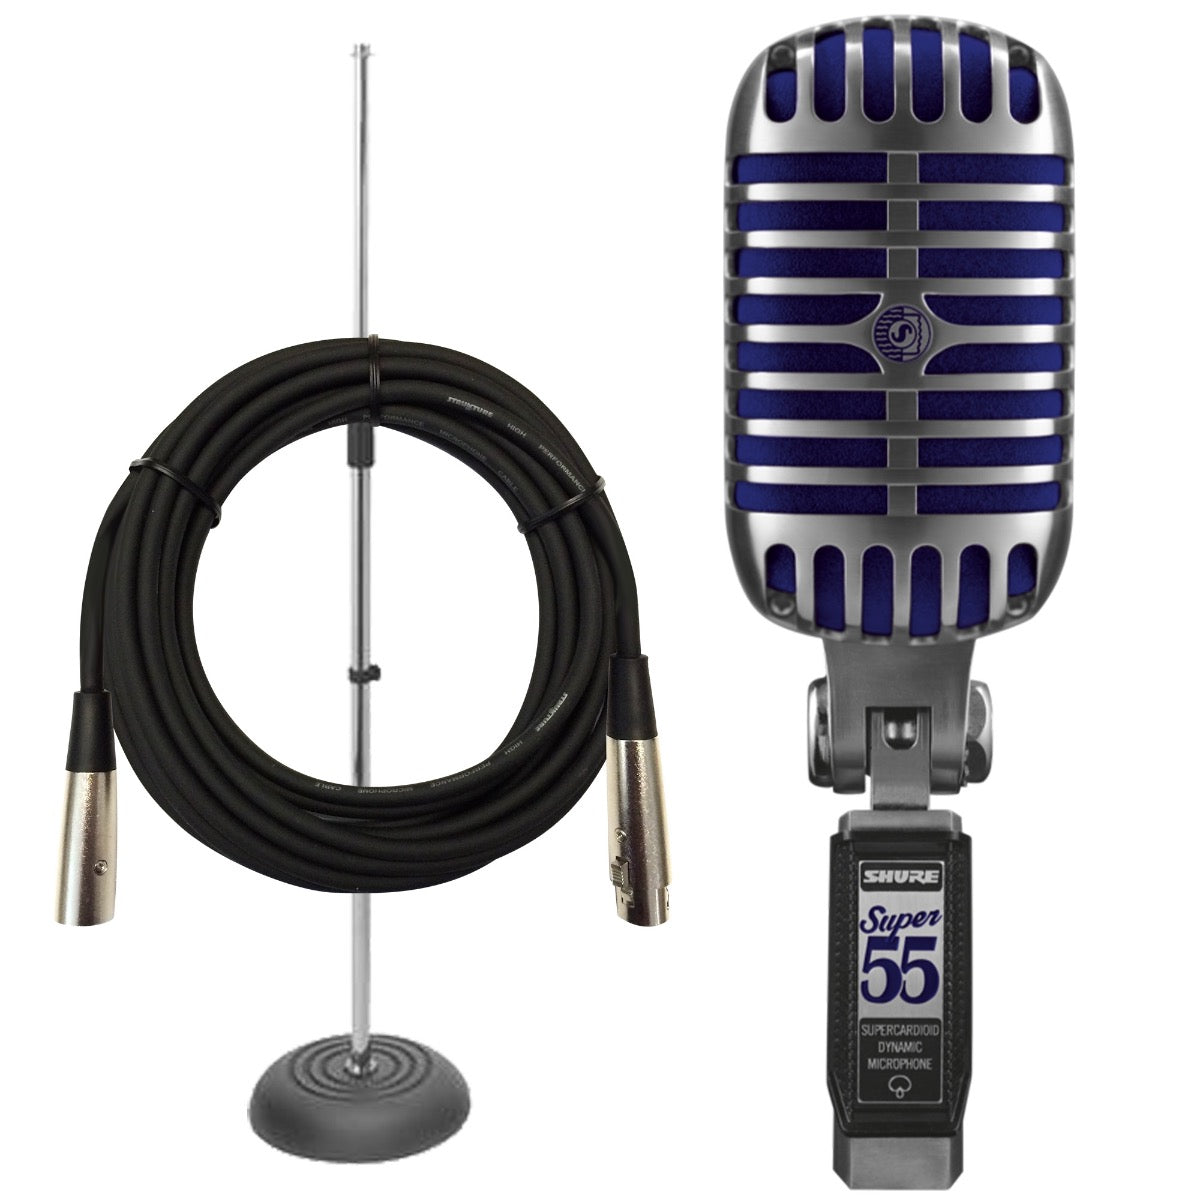 Collage of the components in the Shure Super 55 Deluxe Vocal Microphone PERFORMER PAK bundle